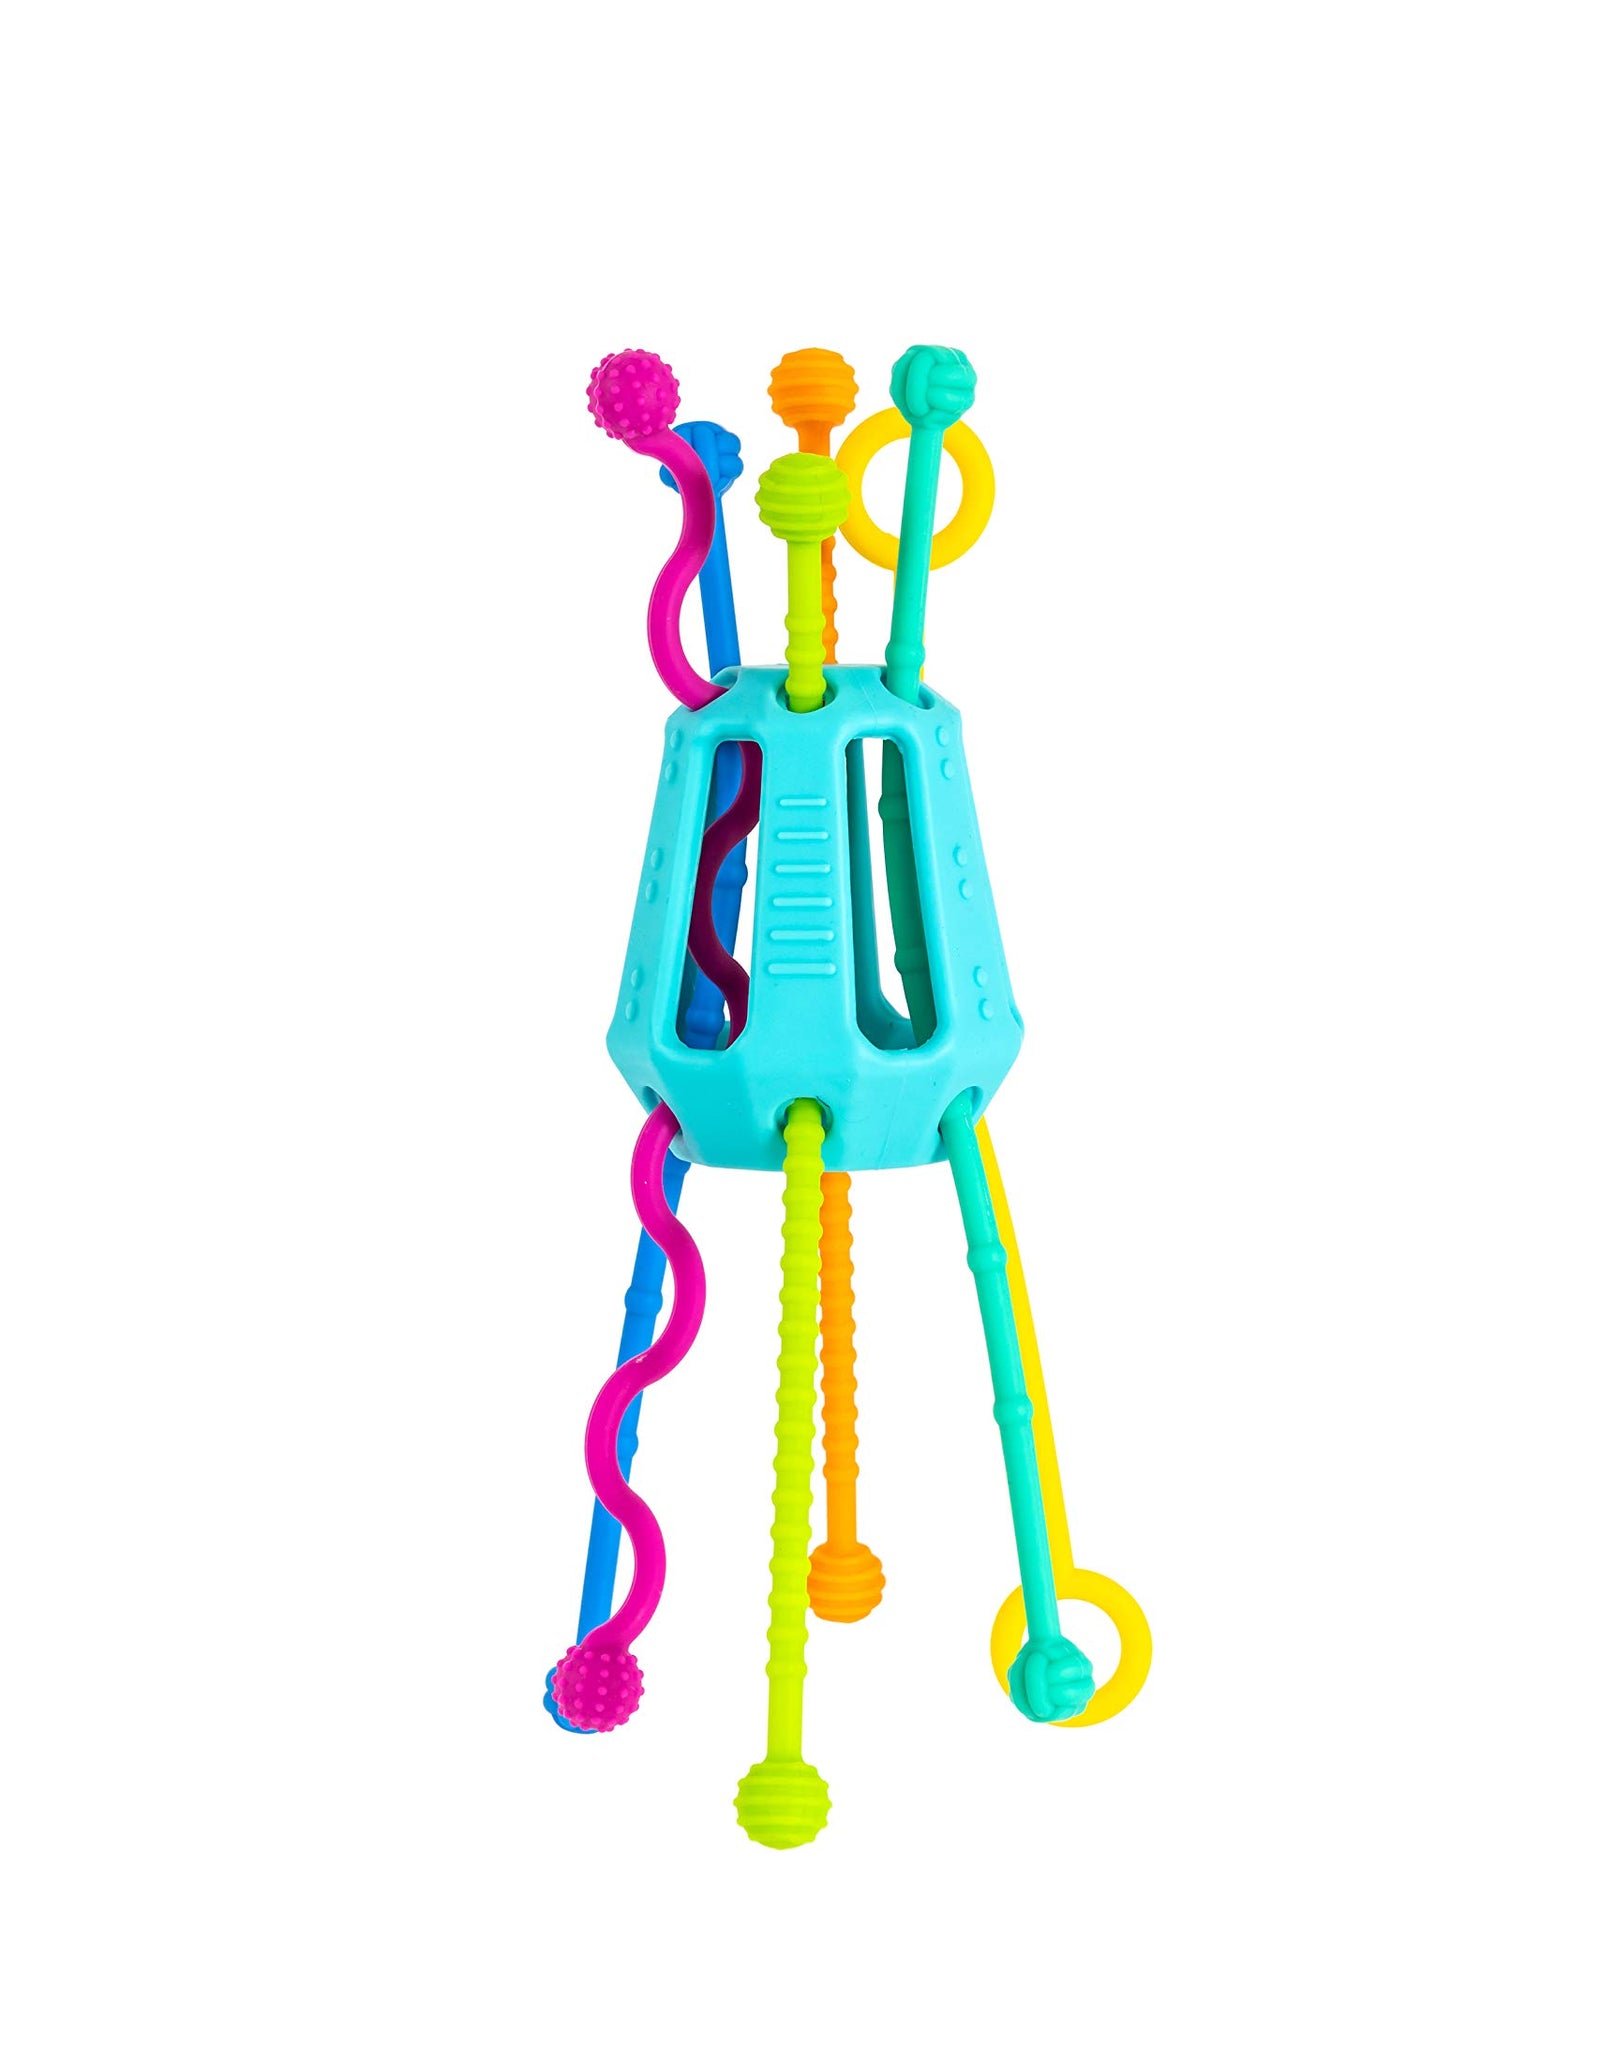 MOBI ZIPPEE - Activity Toy for Sensory Development for Toddlers - Designed by Parents and Reviewed by Doctor's - BPA and Phthalate Free - Made with Food Grade Silicone - for Boys or Girls